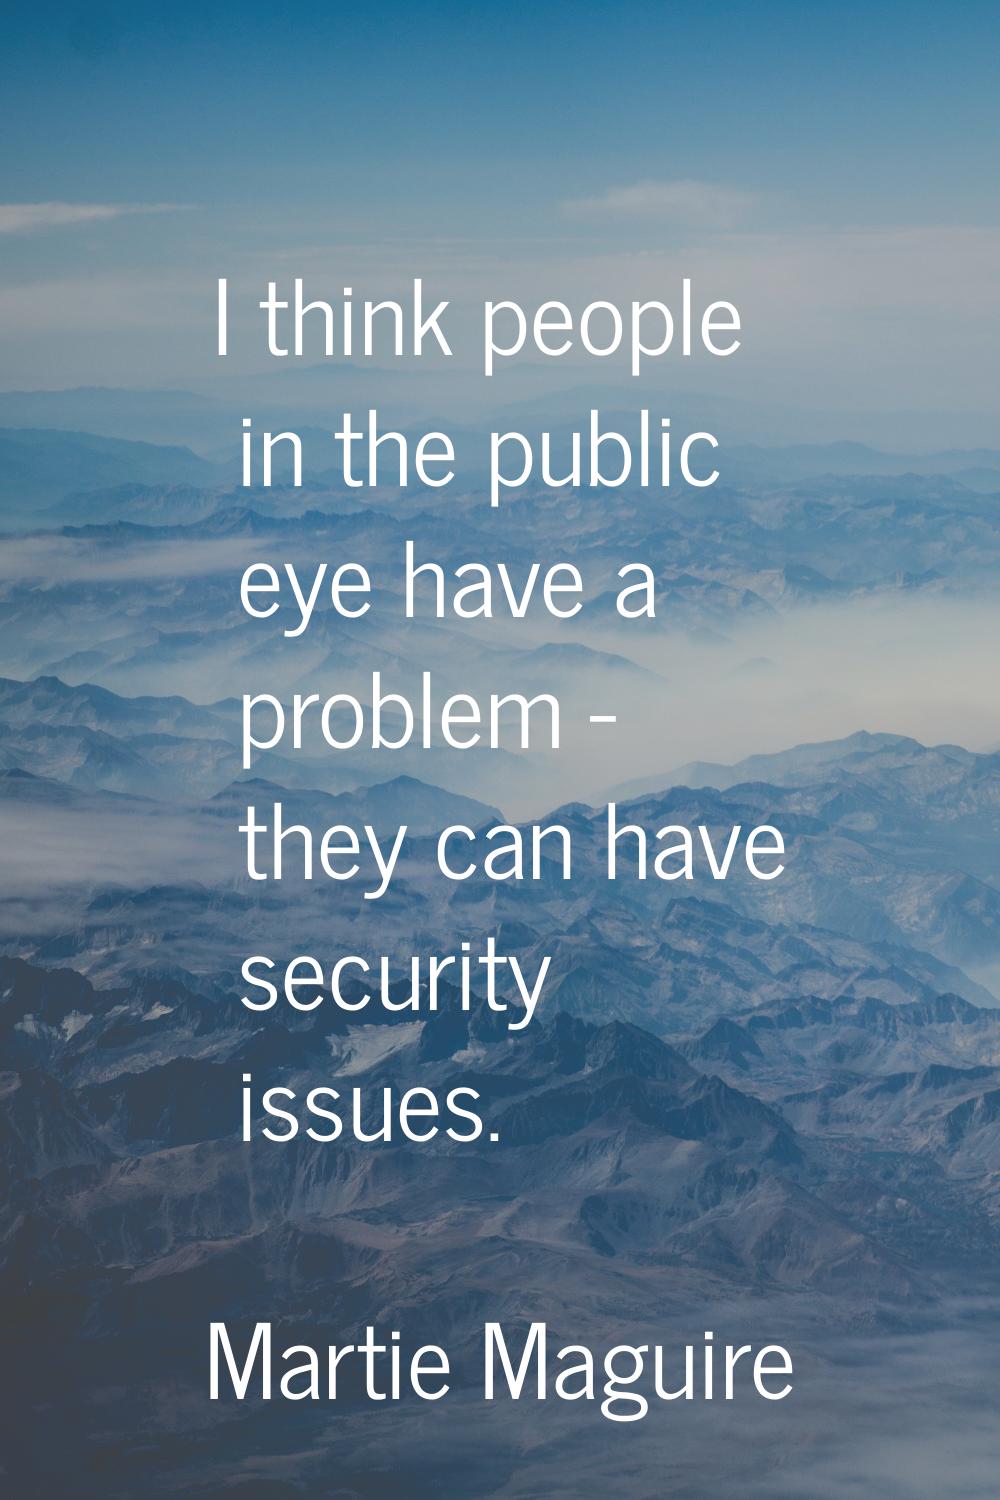 I think people in the public eye have a problem - they can have security issues.